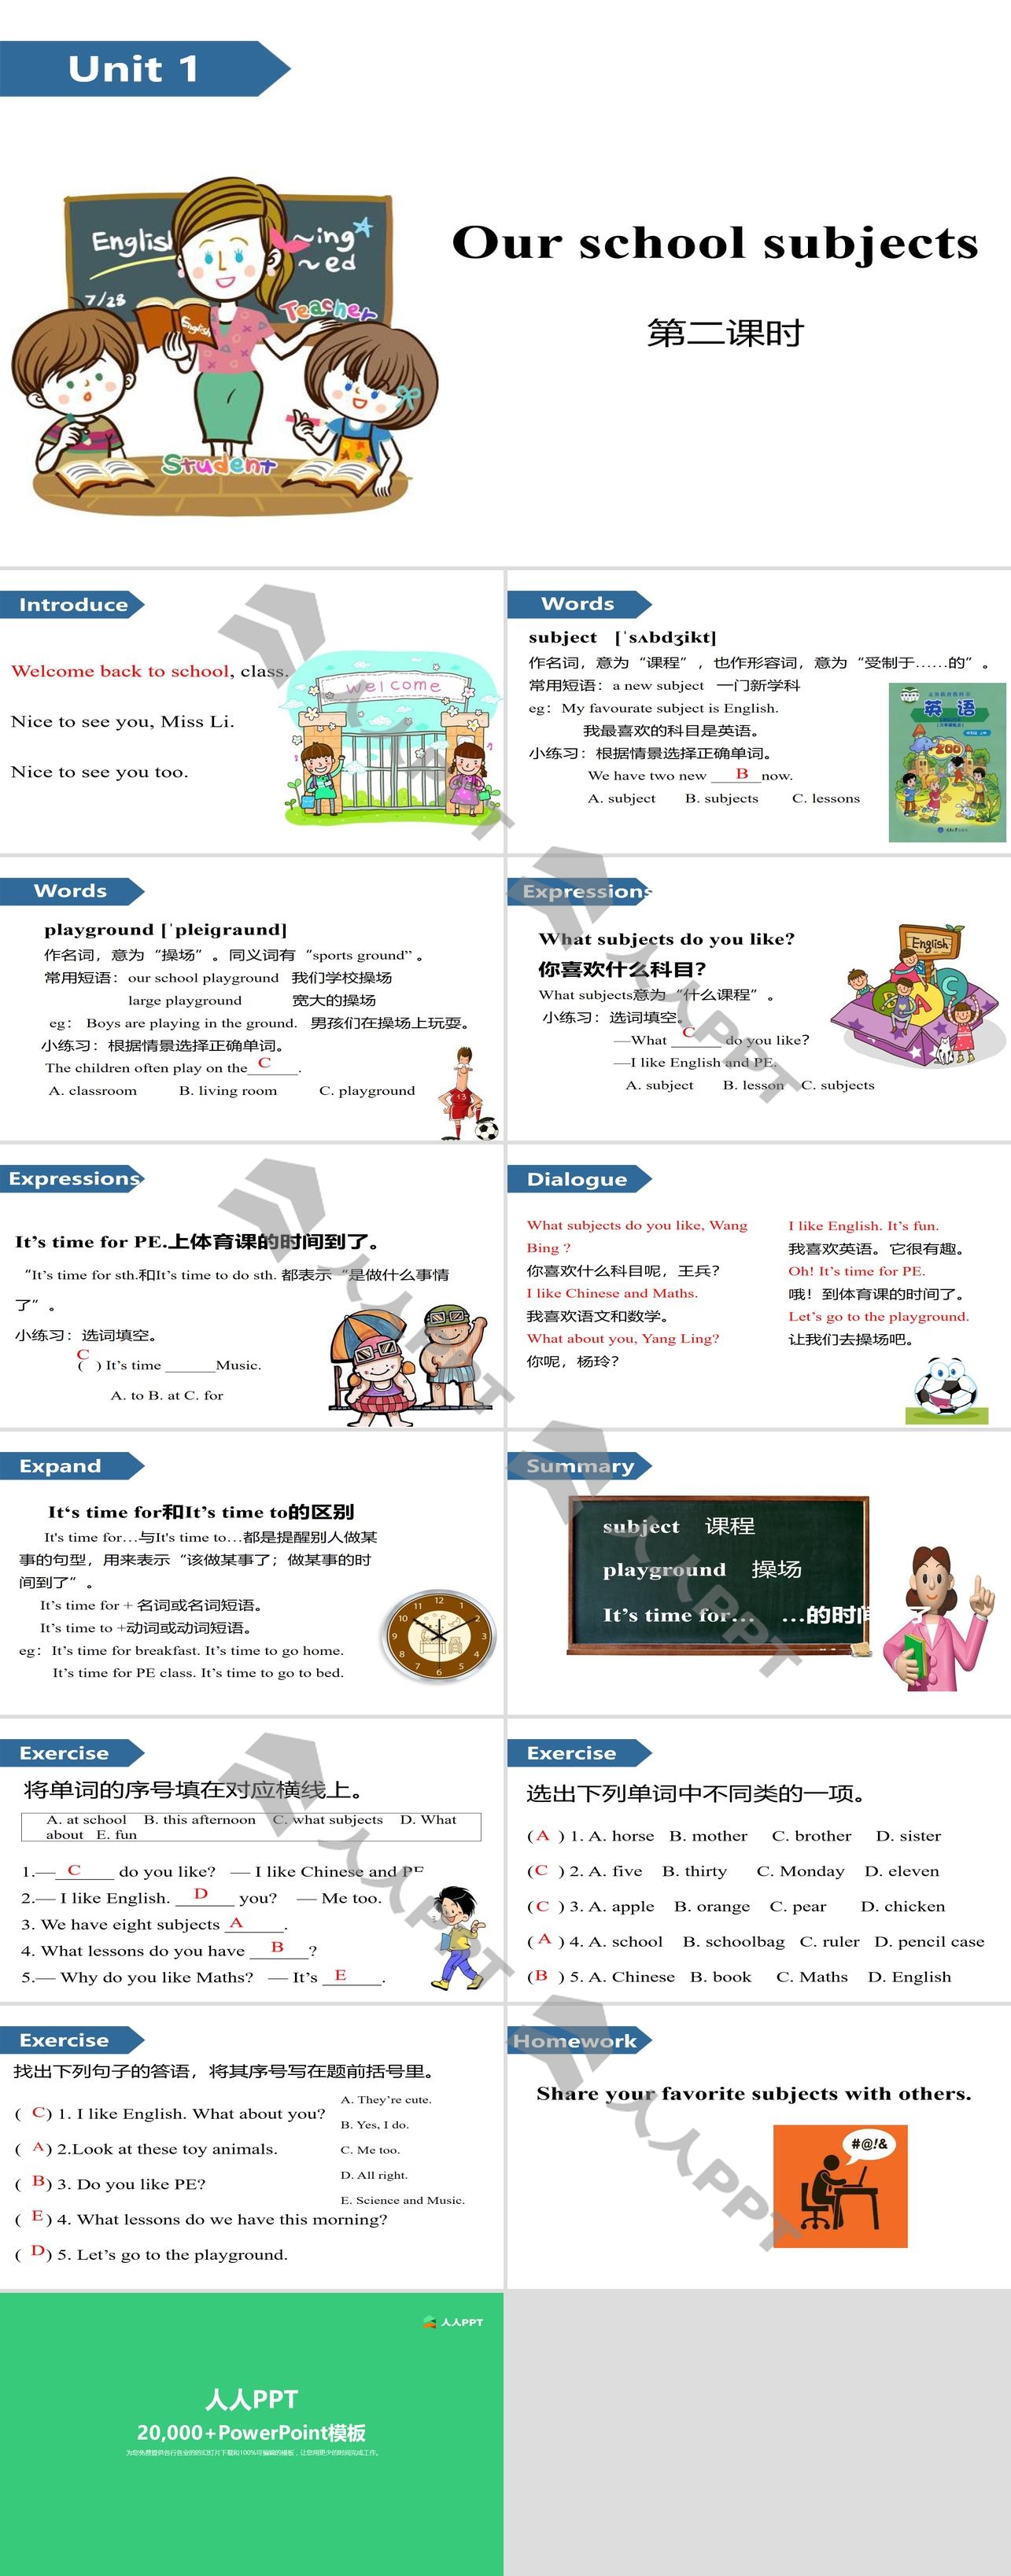 《Our school subjects》PPT(第二课时)长图